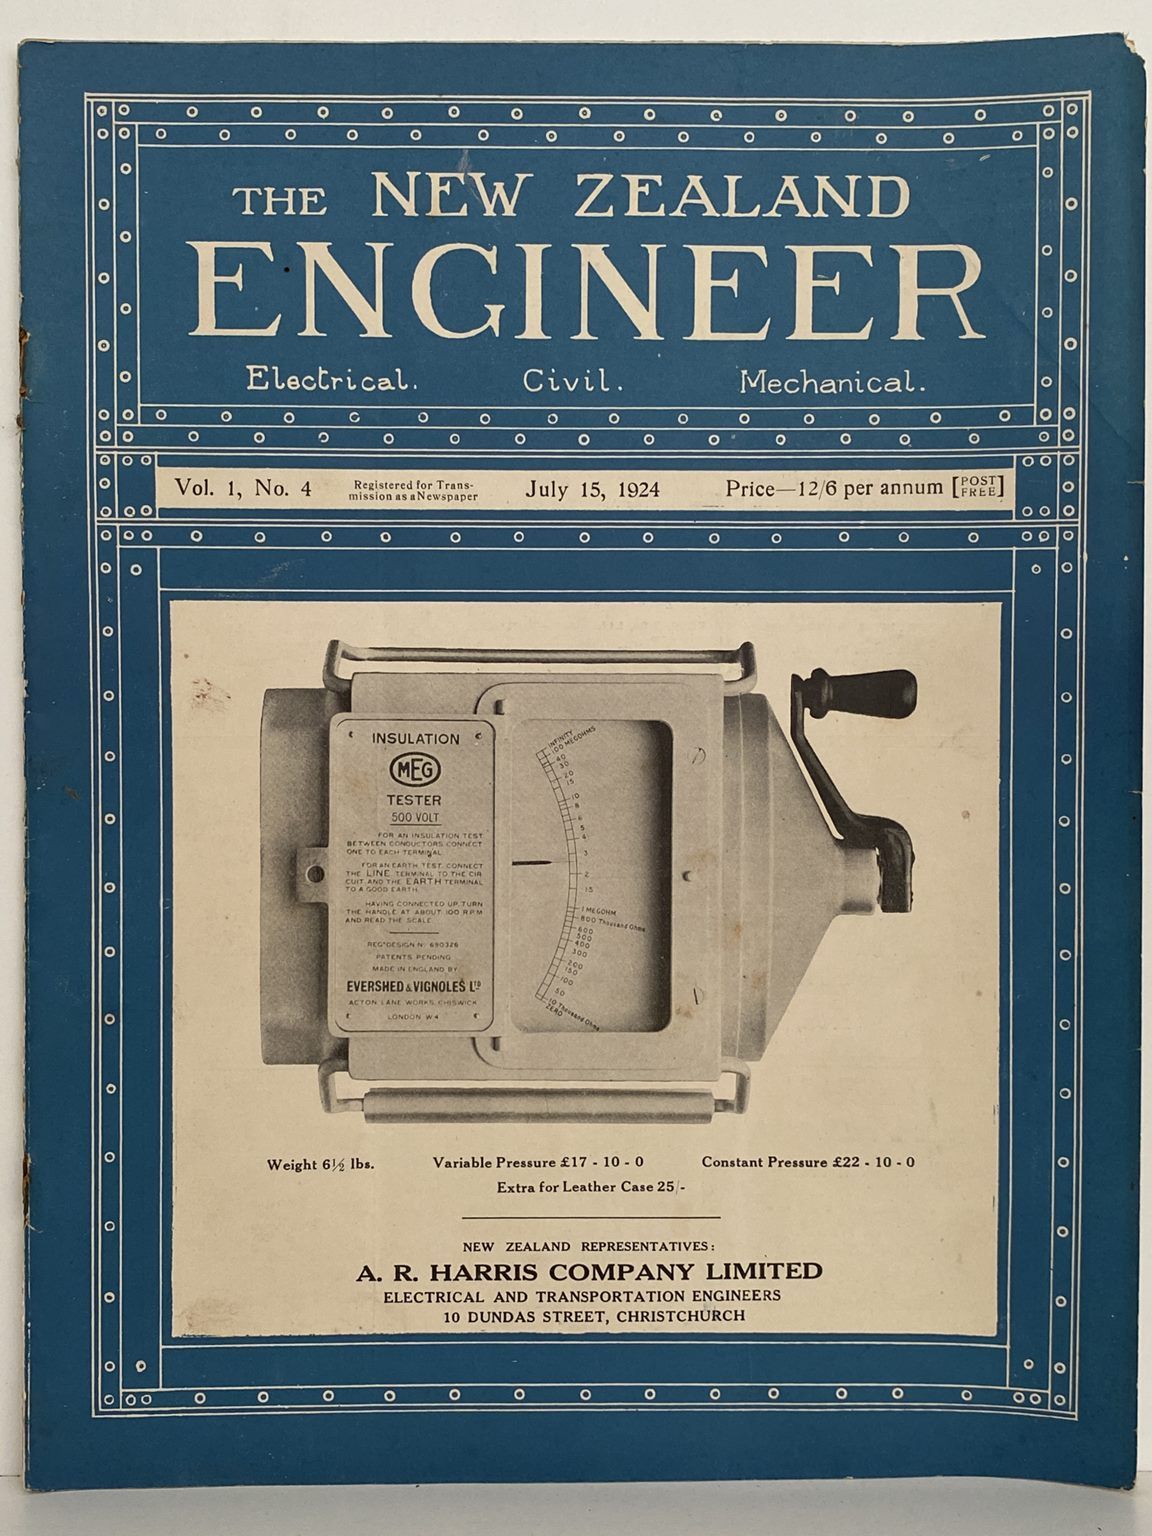 OLD MAGAZINE: The New Zealand Engineer Vol. 1, No. 4 - 15 July 1924